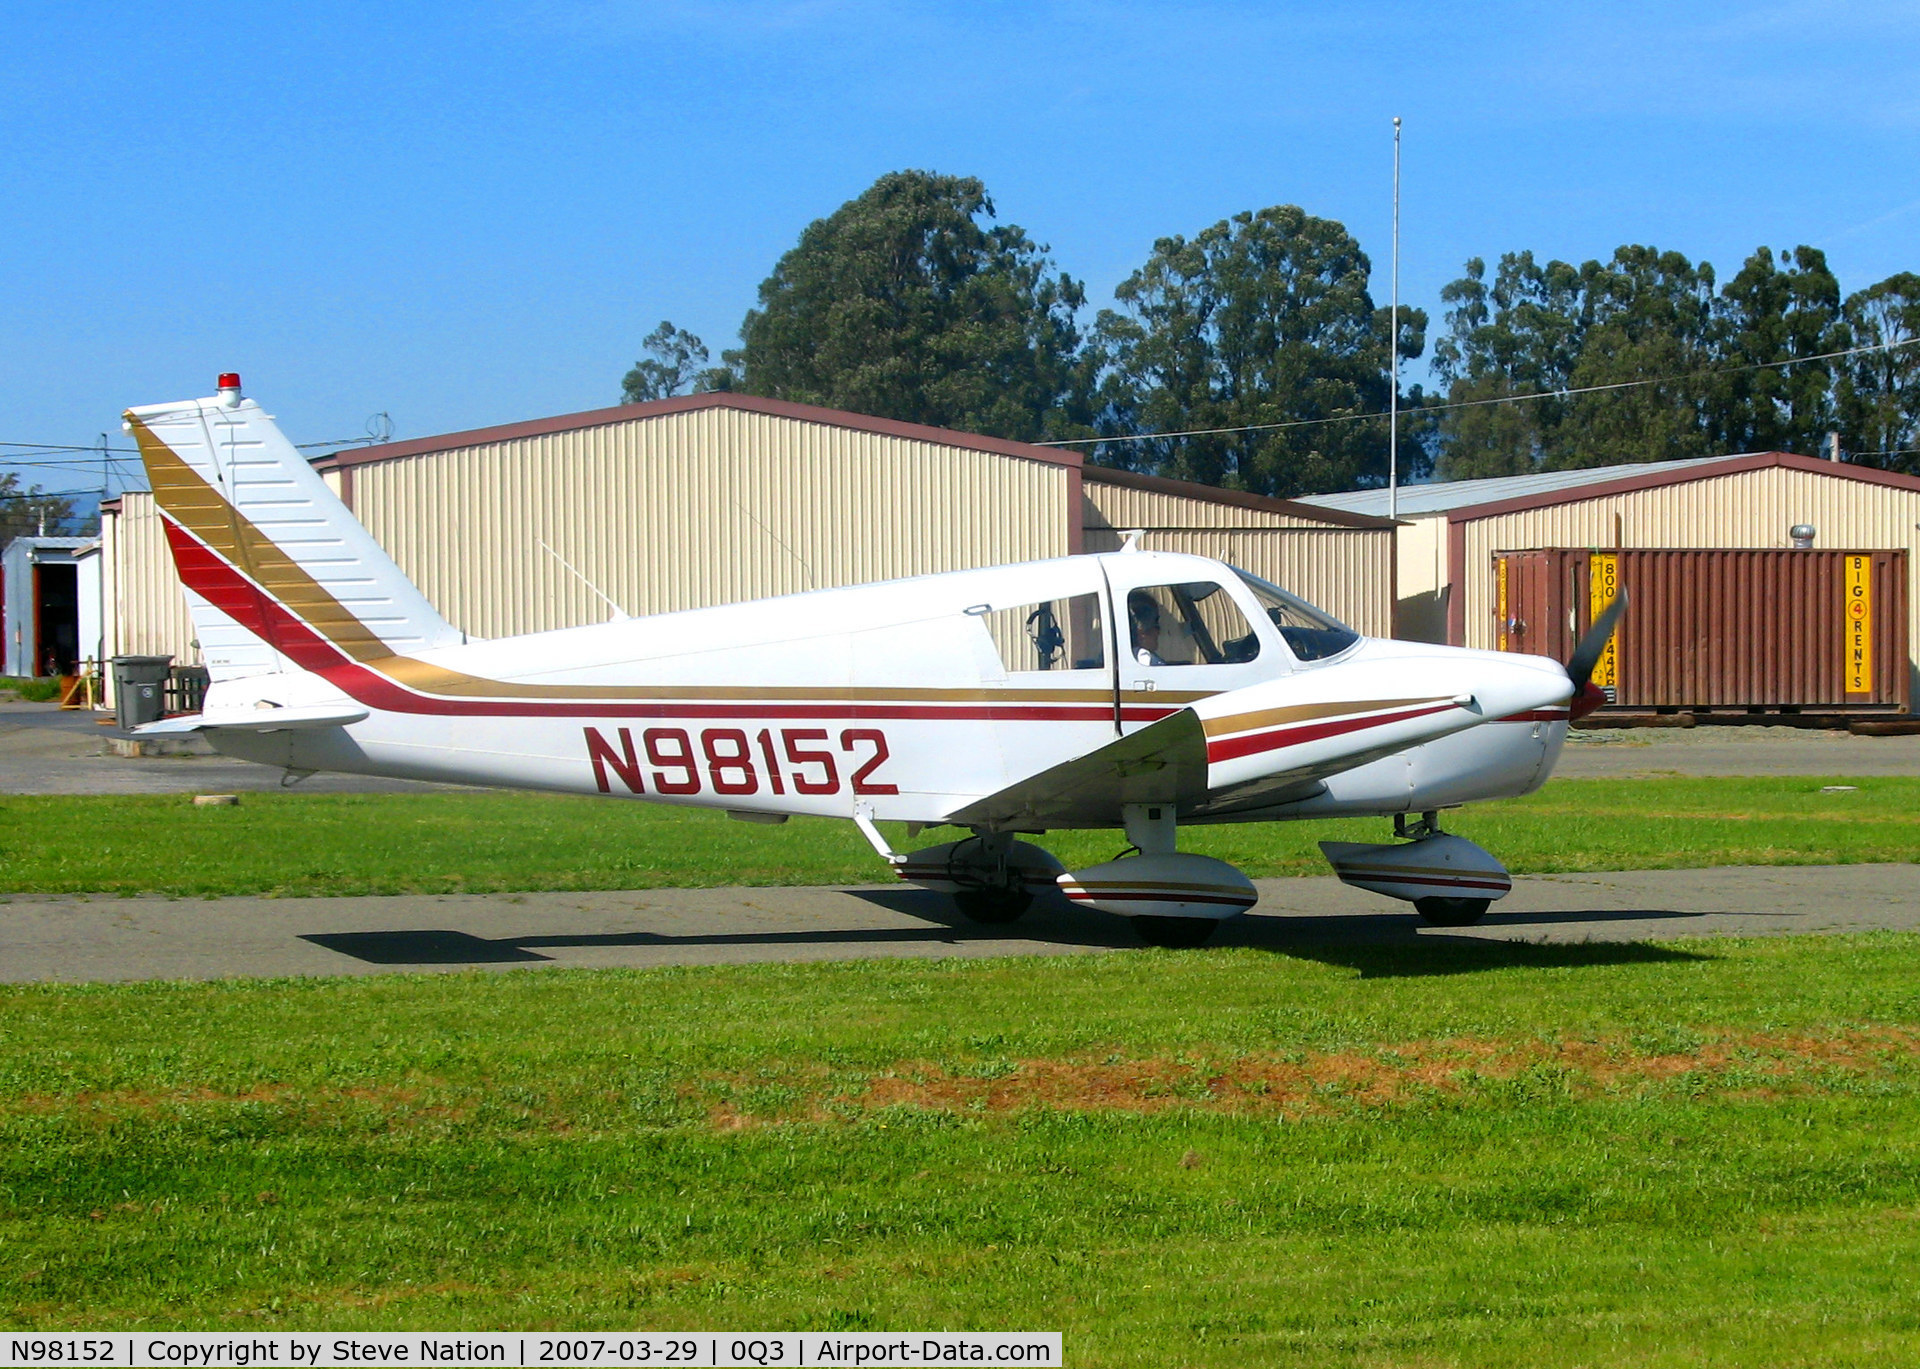 N98152, 1969 Piper PA-28-140 C/N 28-26077, 1969 Piper PA-28-140 visiting from Visalia @ Schelleville Airport (Sonoma), CA